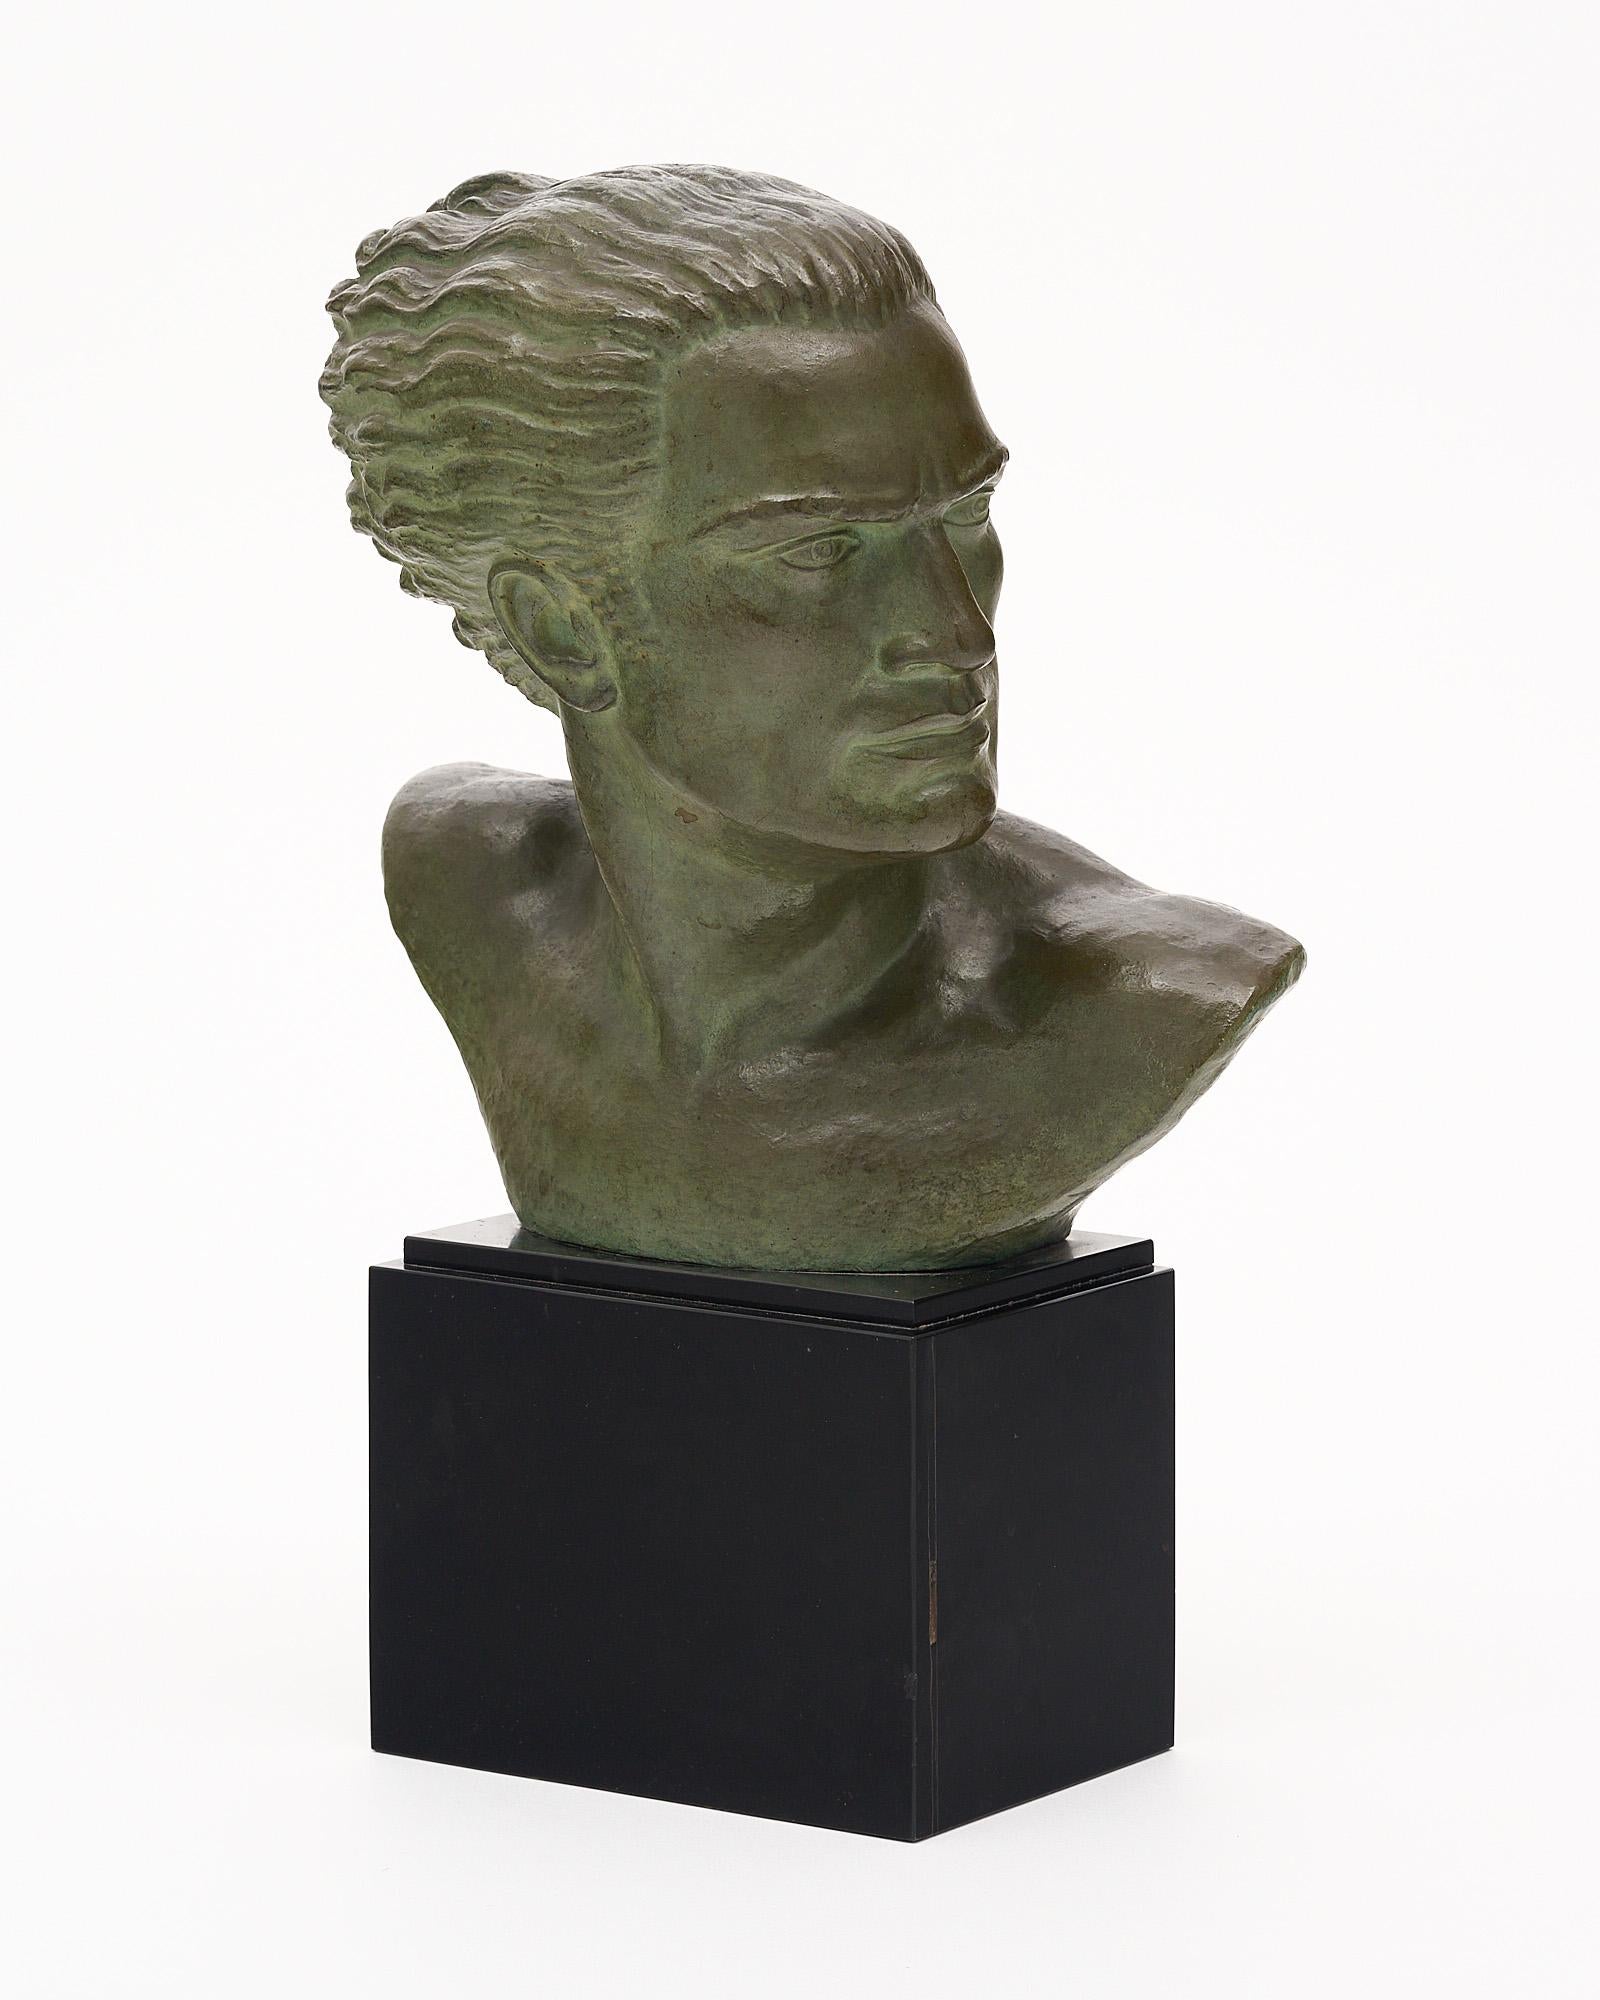 French Art Deco bronze bust of Jean Mermoz. This piece has a beautiful green patina and black marble base. Jean Mermoz was a French pioneer aviator; 1901-1936. This depicts his courageous expression with a slight movement in the hair. He was most